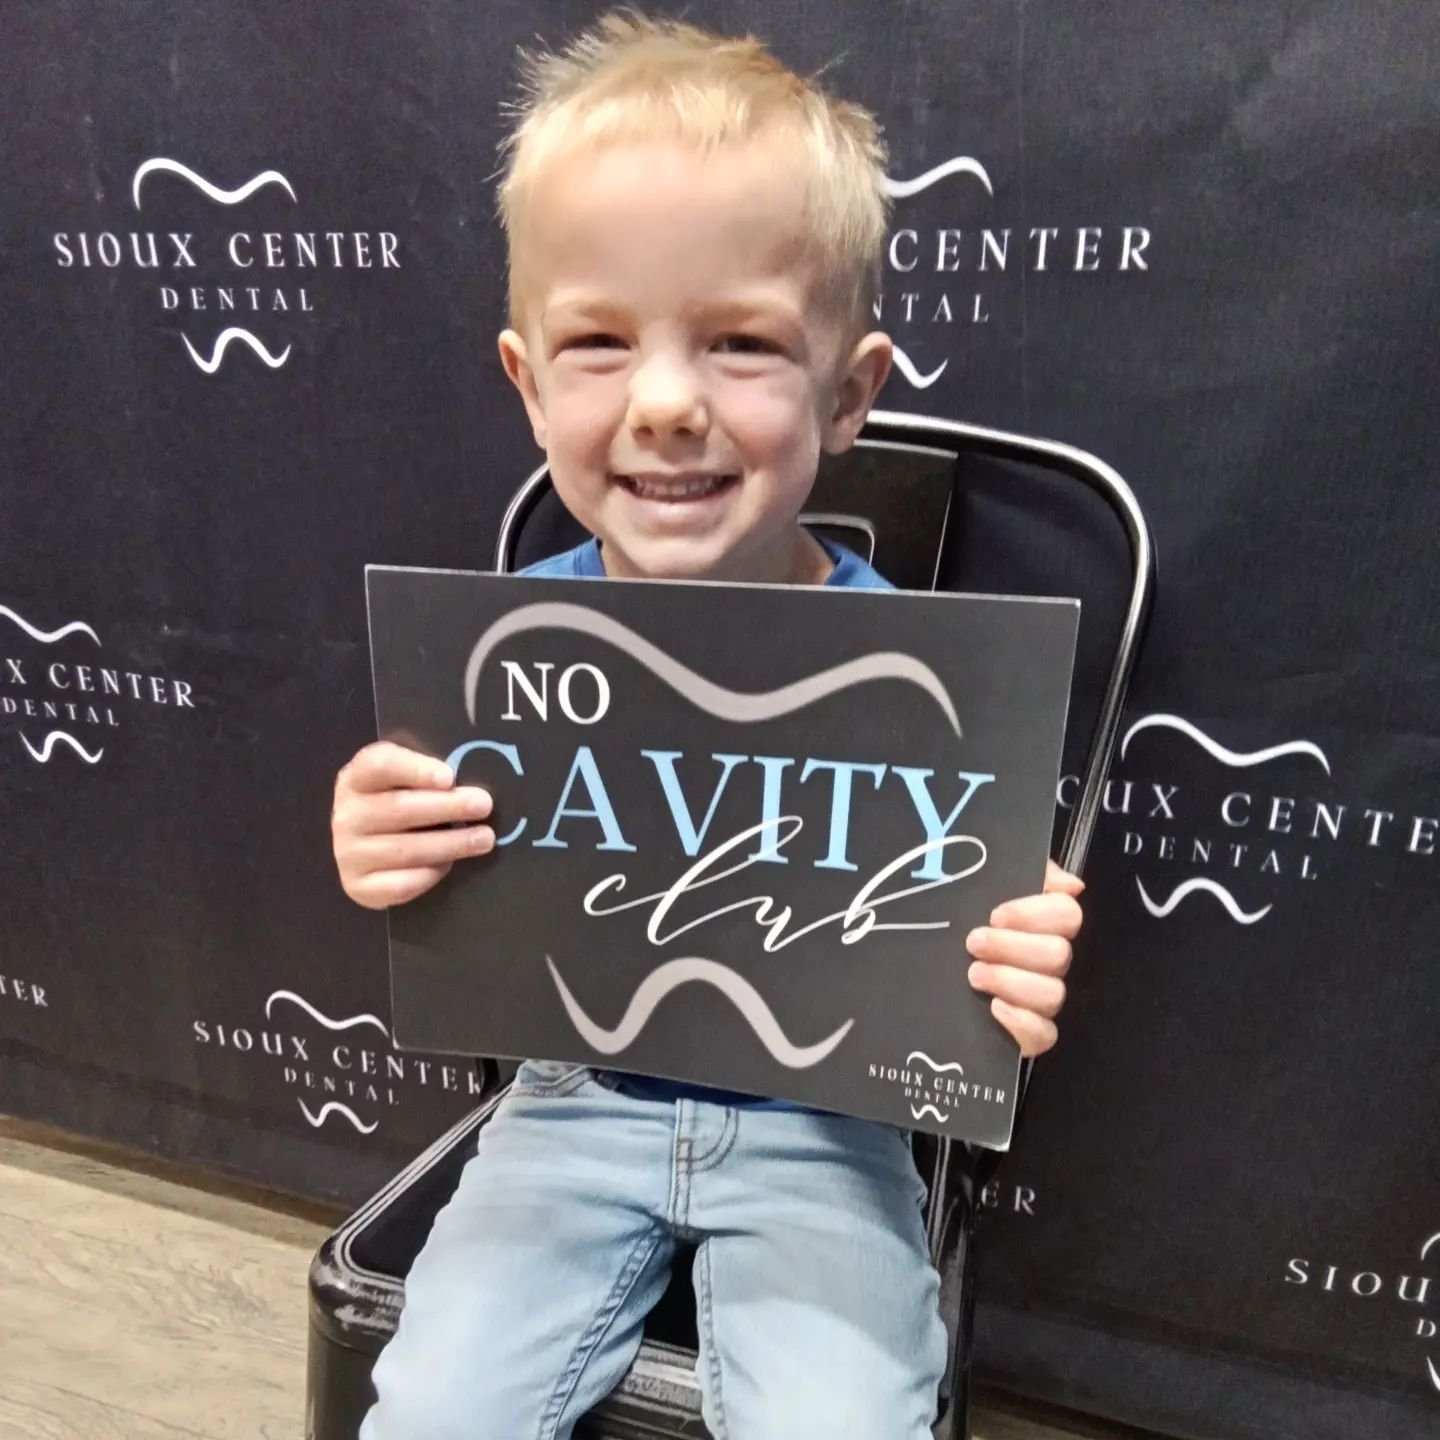 Happy Thursday! Kamden and Hope were in to see us and they had awesome visits! 🎉 We are thrilled to report that they are both members of our ⭐No Cavity Club⭐! 🥇 Way to go, kids! 👏👏👏 Keep up the great brushing! 😎🦷👍
.
.
.
#siouxcenterdental 
#f